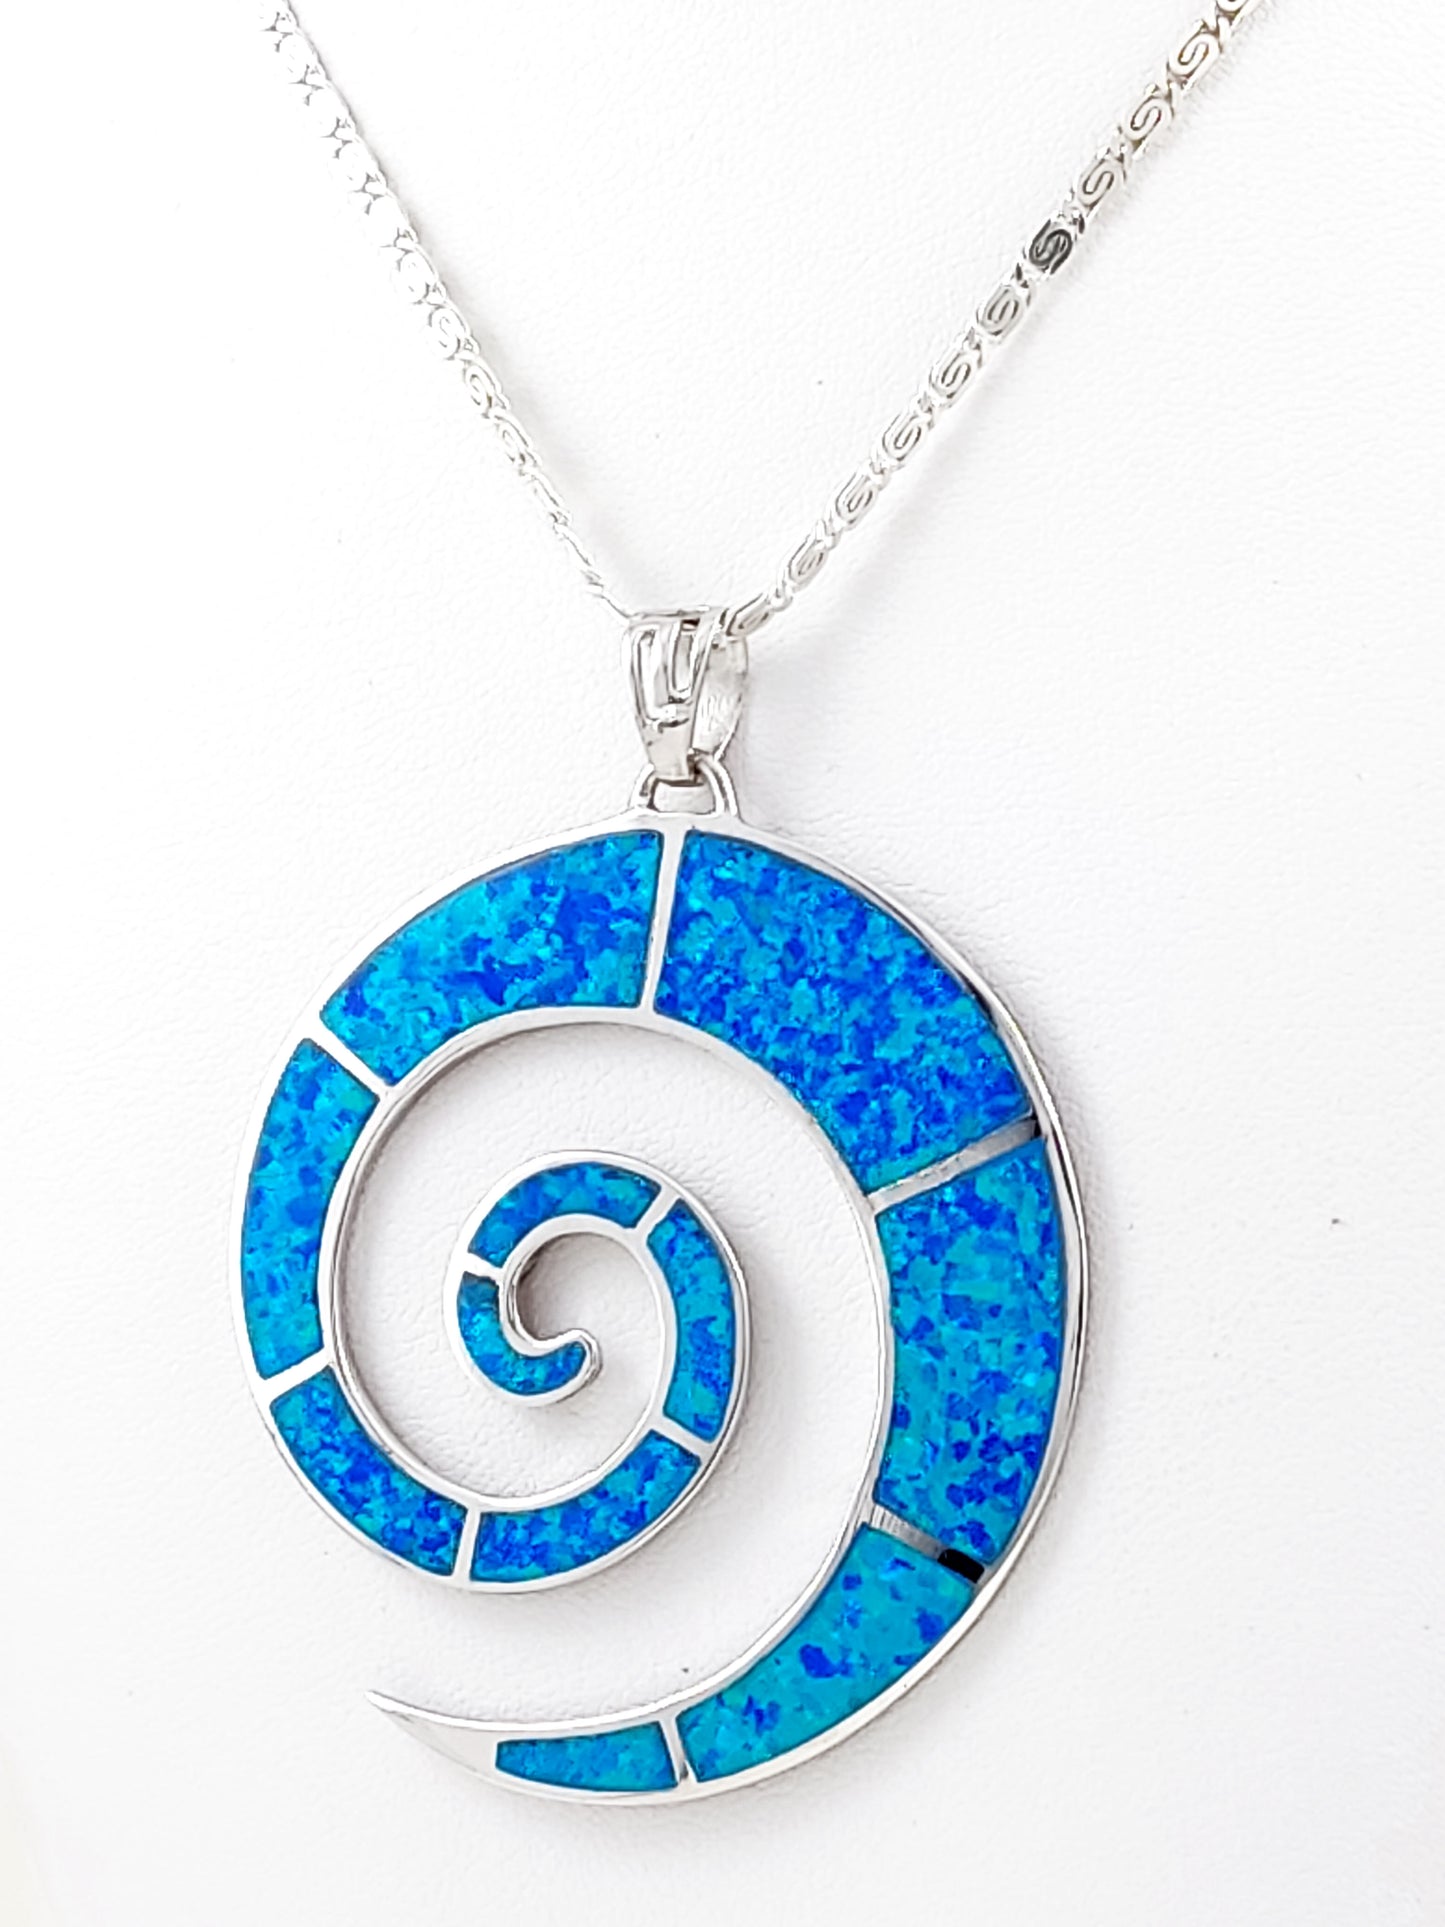 Greek blue opal big spiral necklace from Greece. The blue opal spiral pendant measures 50mm in diameter and the infinity silver chain measures 2mm in width.